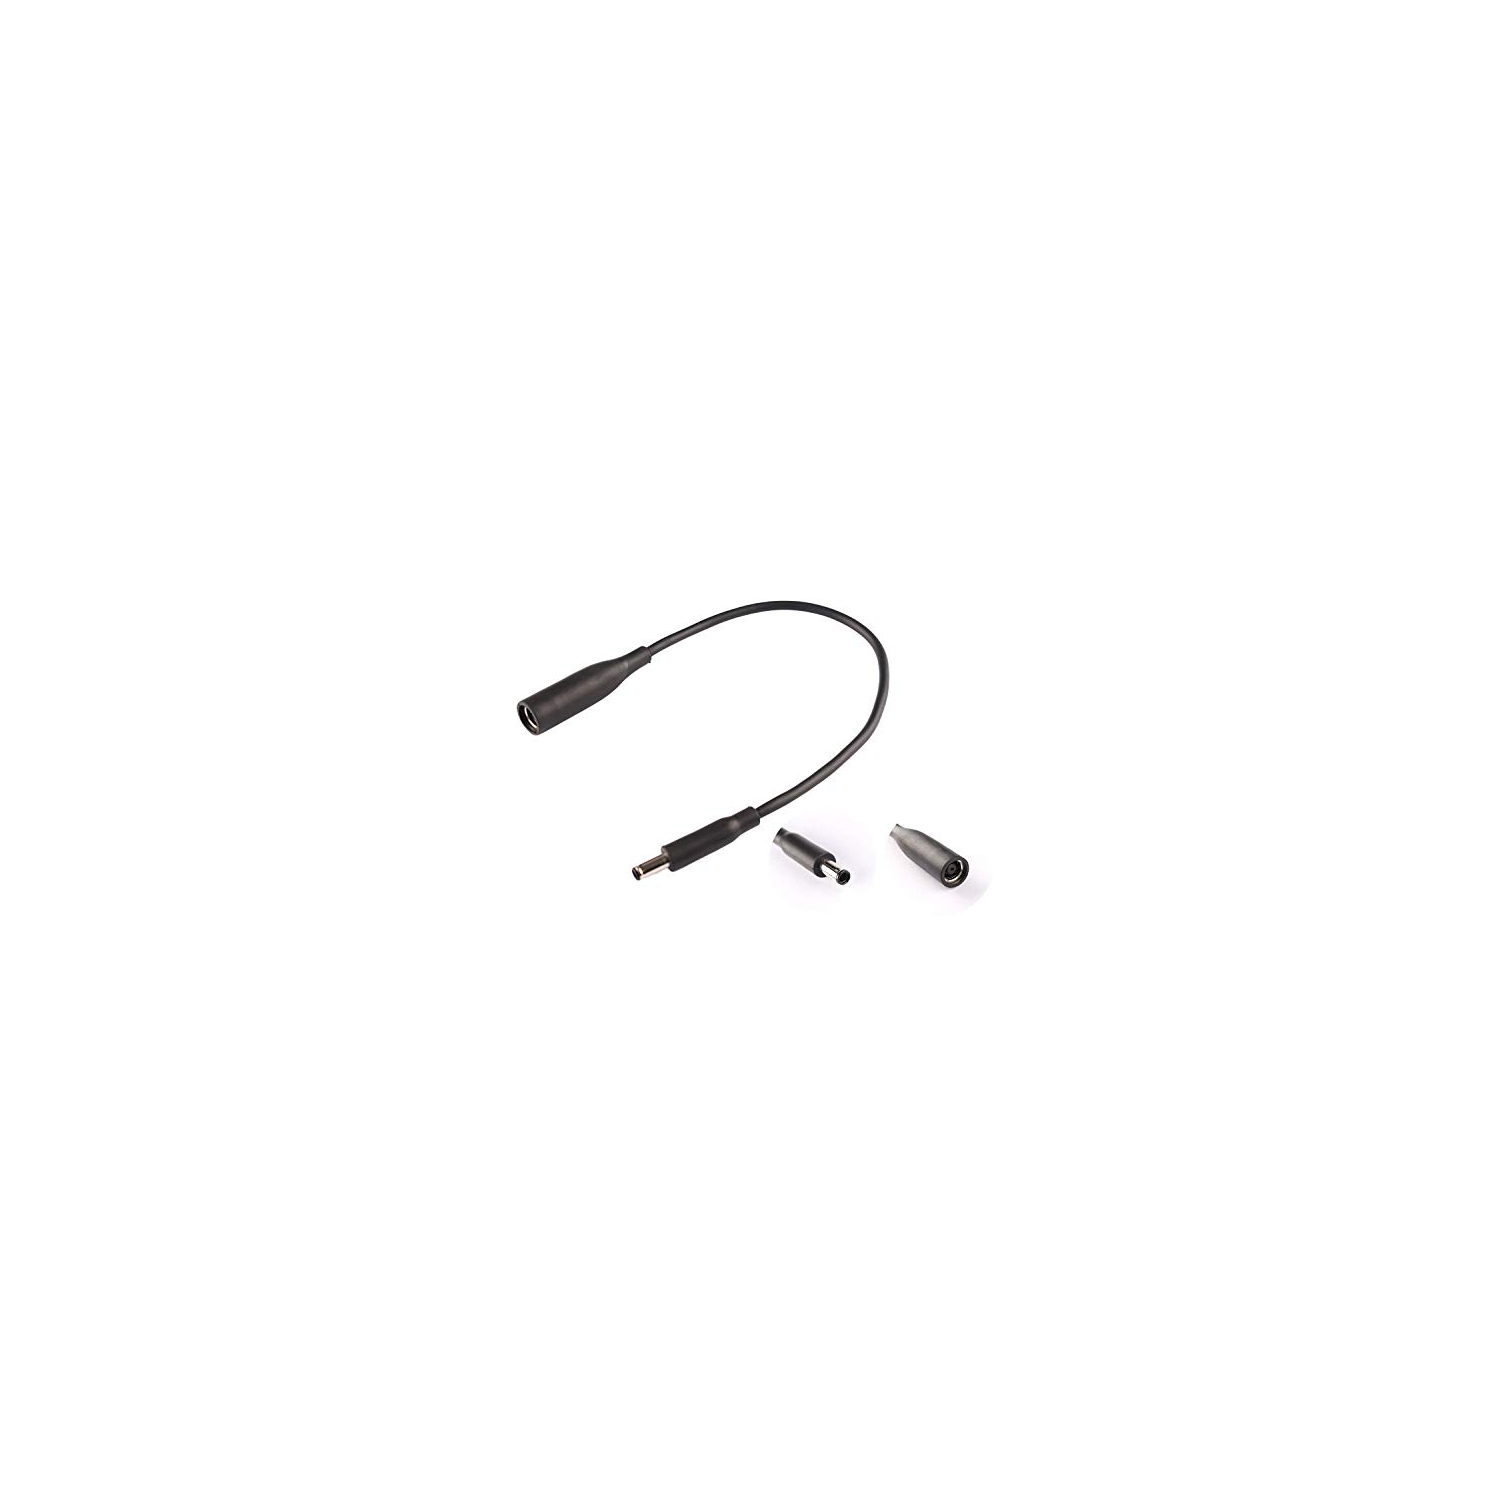 LaptopKing Dongle Tip Dc Power Converter Cable for D5g6m 0d5g6m Dell M3800 XPS 12 13 9350 3960 15 5930 5950 Inspiron 11 13 14